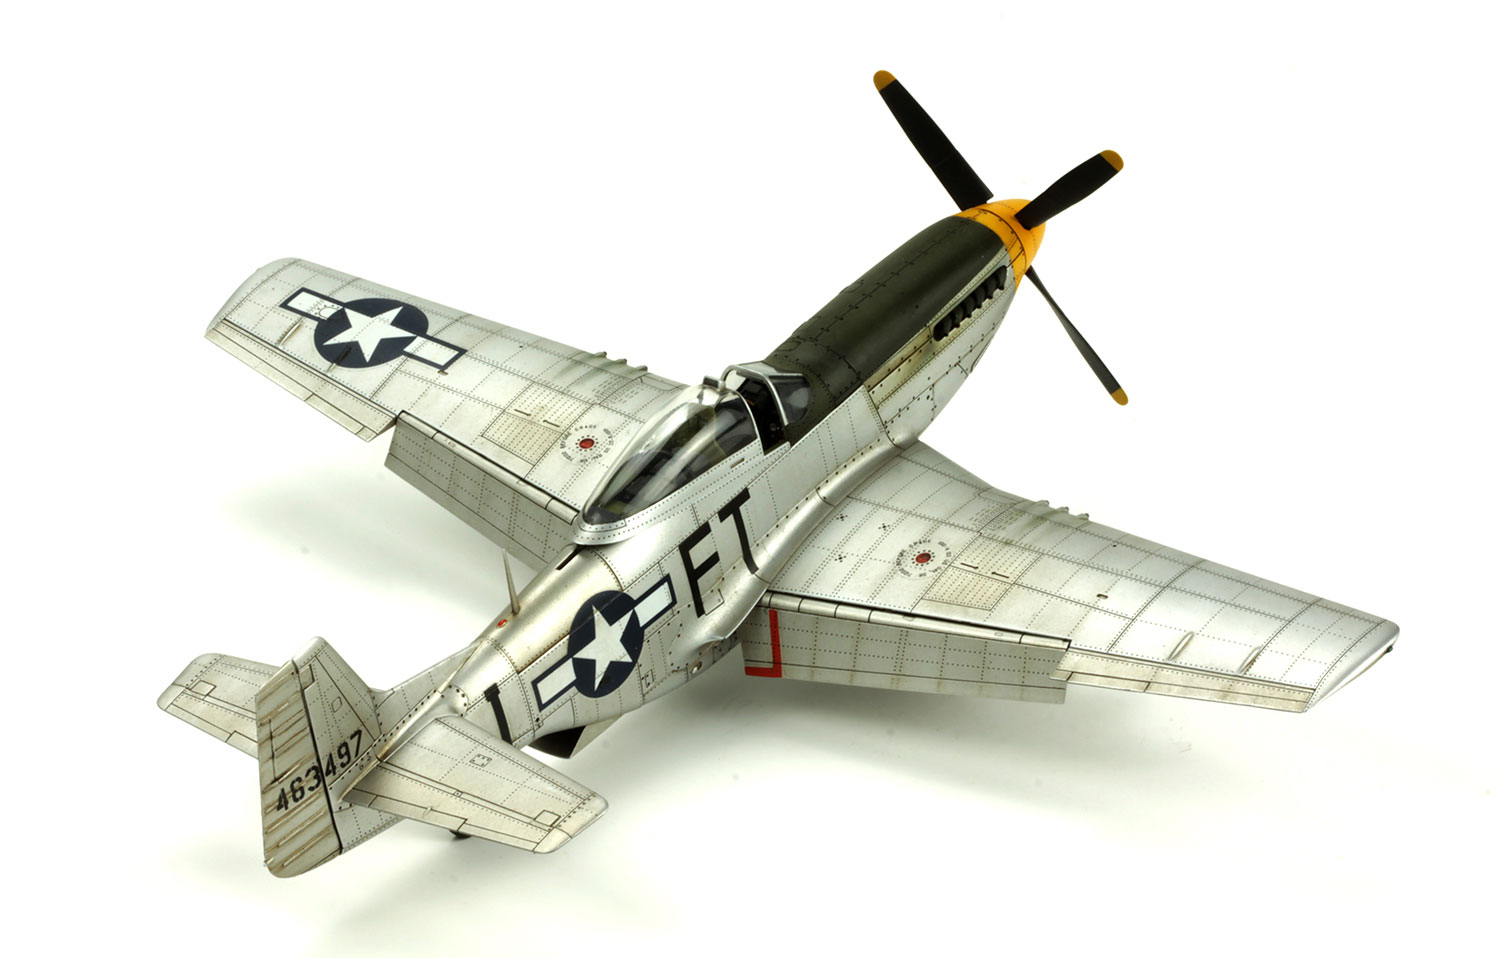 Meng Model LS-009 1/48 North American P-51D Mustang Fighter “Yellow Nose” 